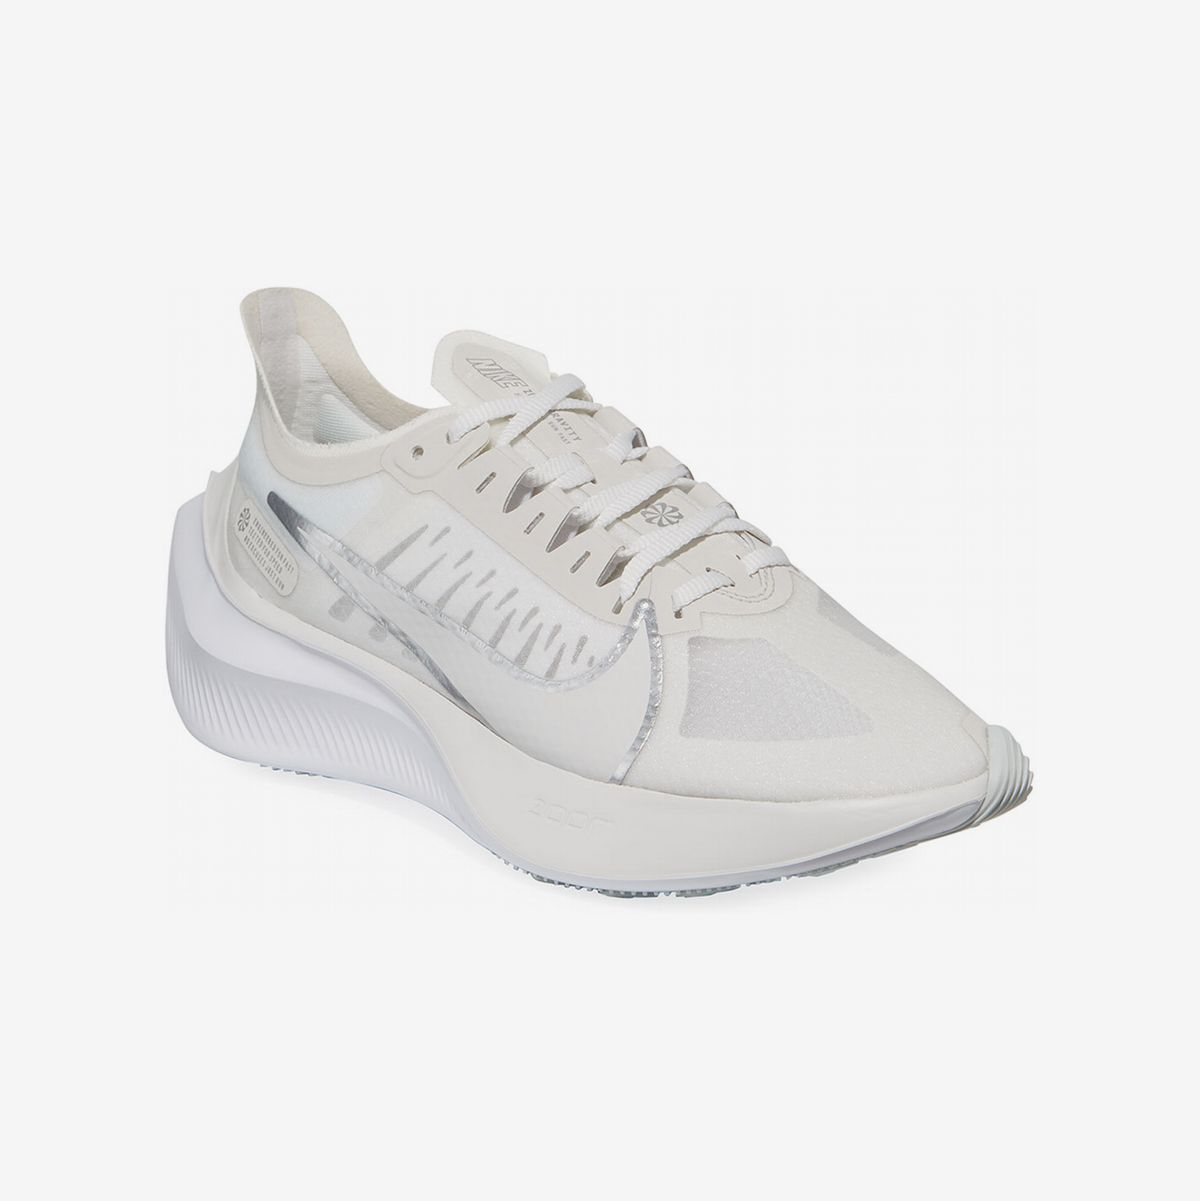 nike all white leather tennis shoes